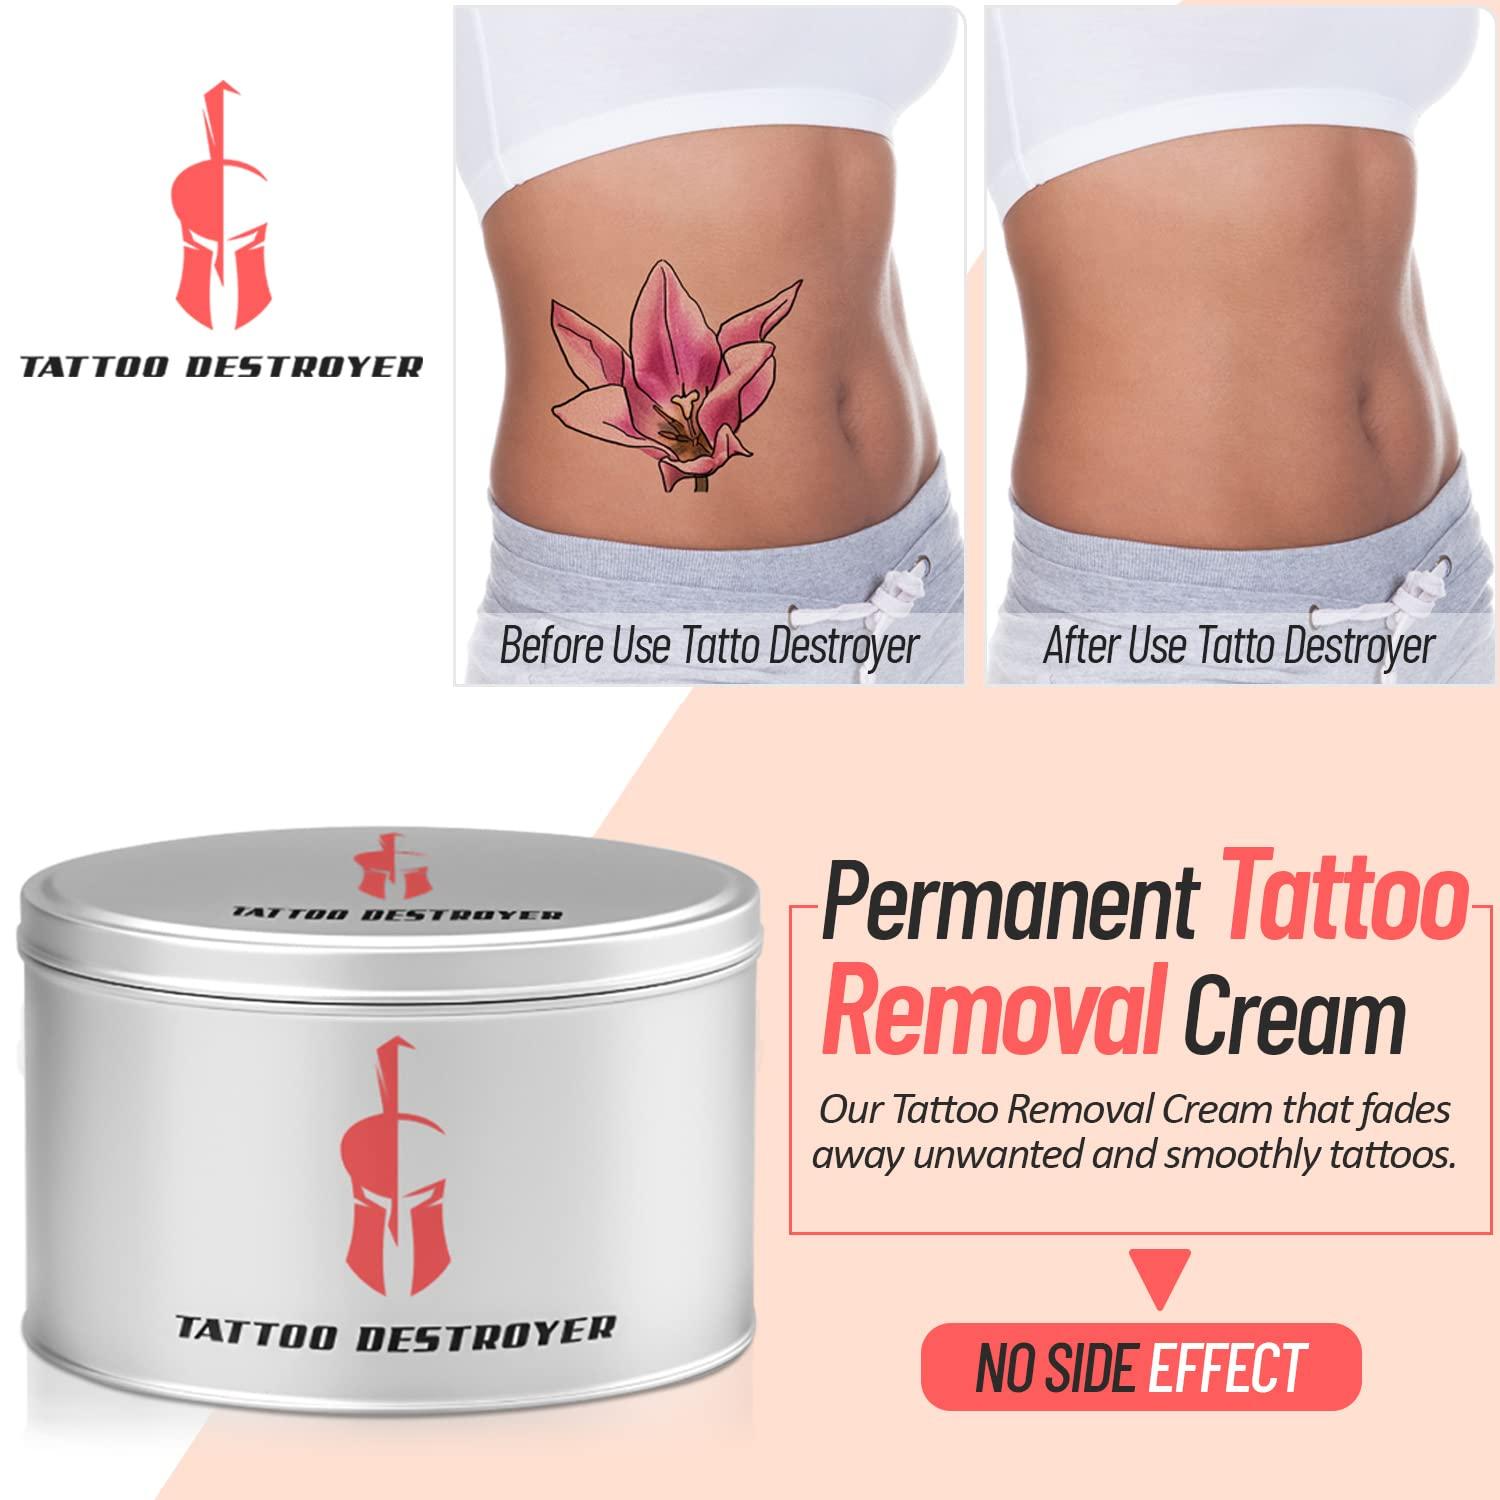 Best Tattoo Removal Creams 2022: Reviews of Tattoo Fading Cream, Balm